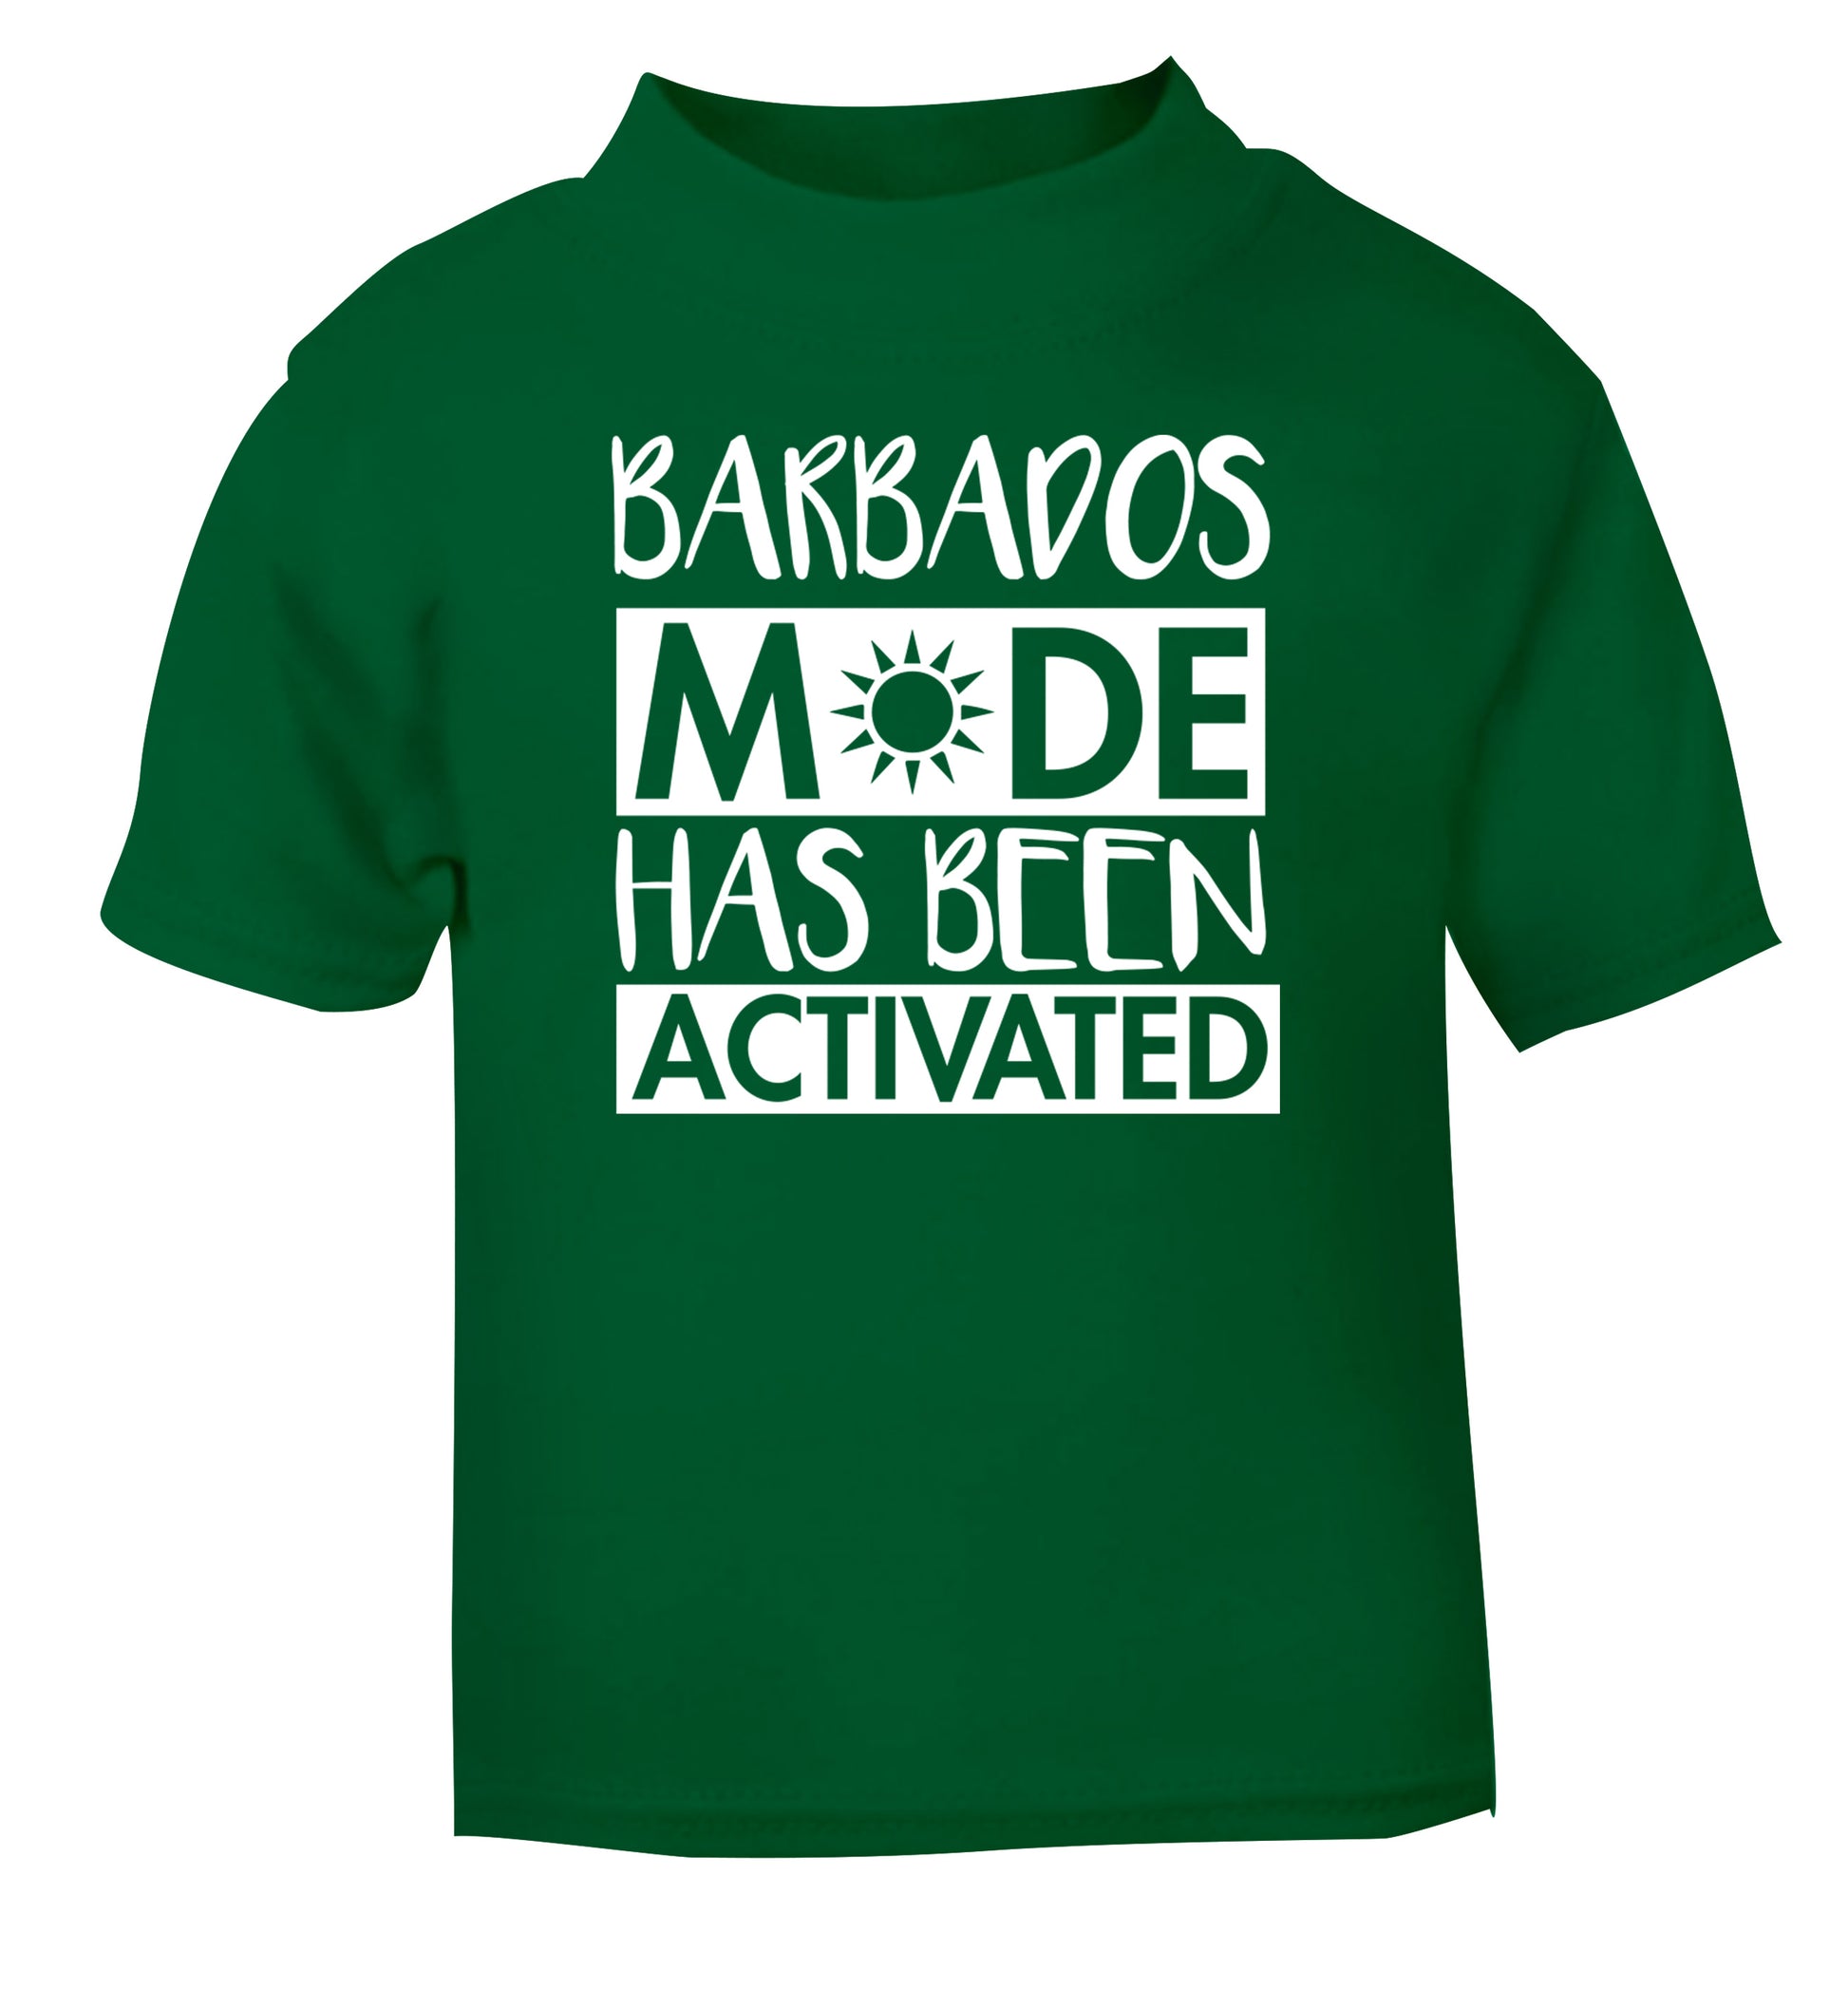 Barbados mode has been activated green Baby Toddler Tshirt 2 Years